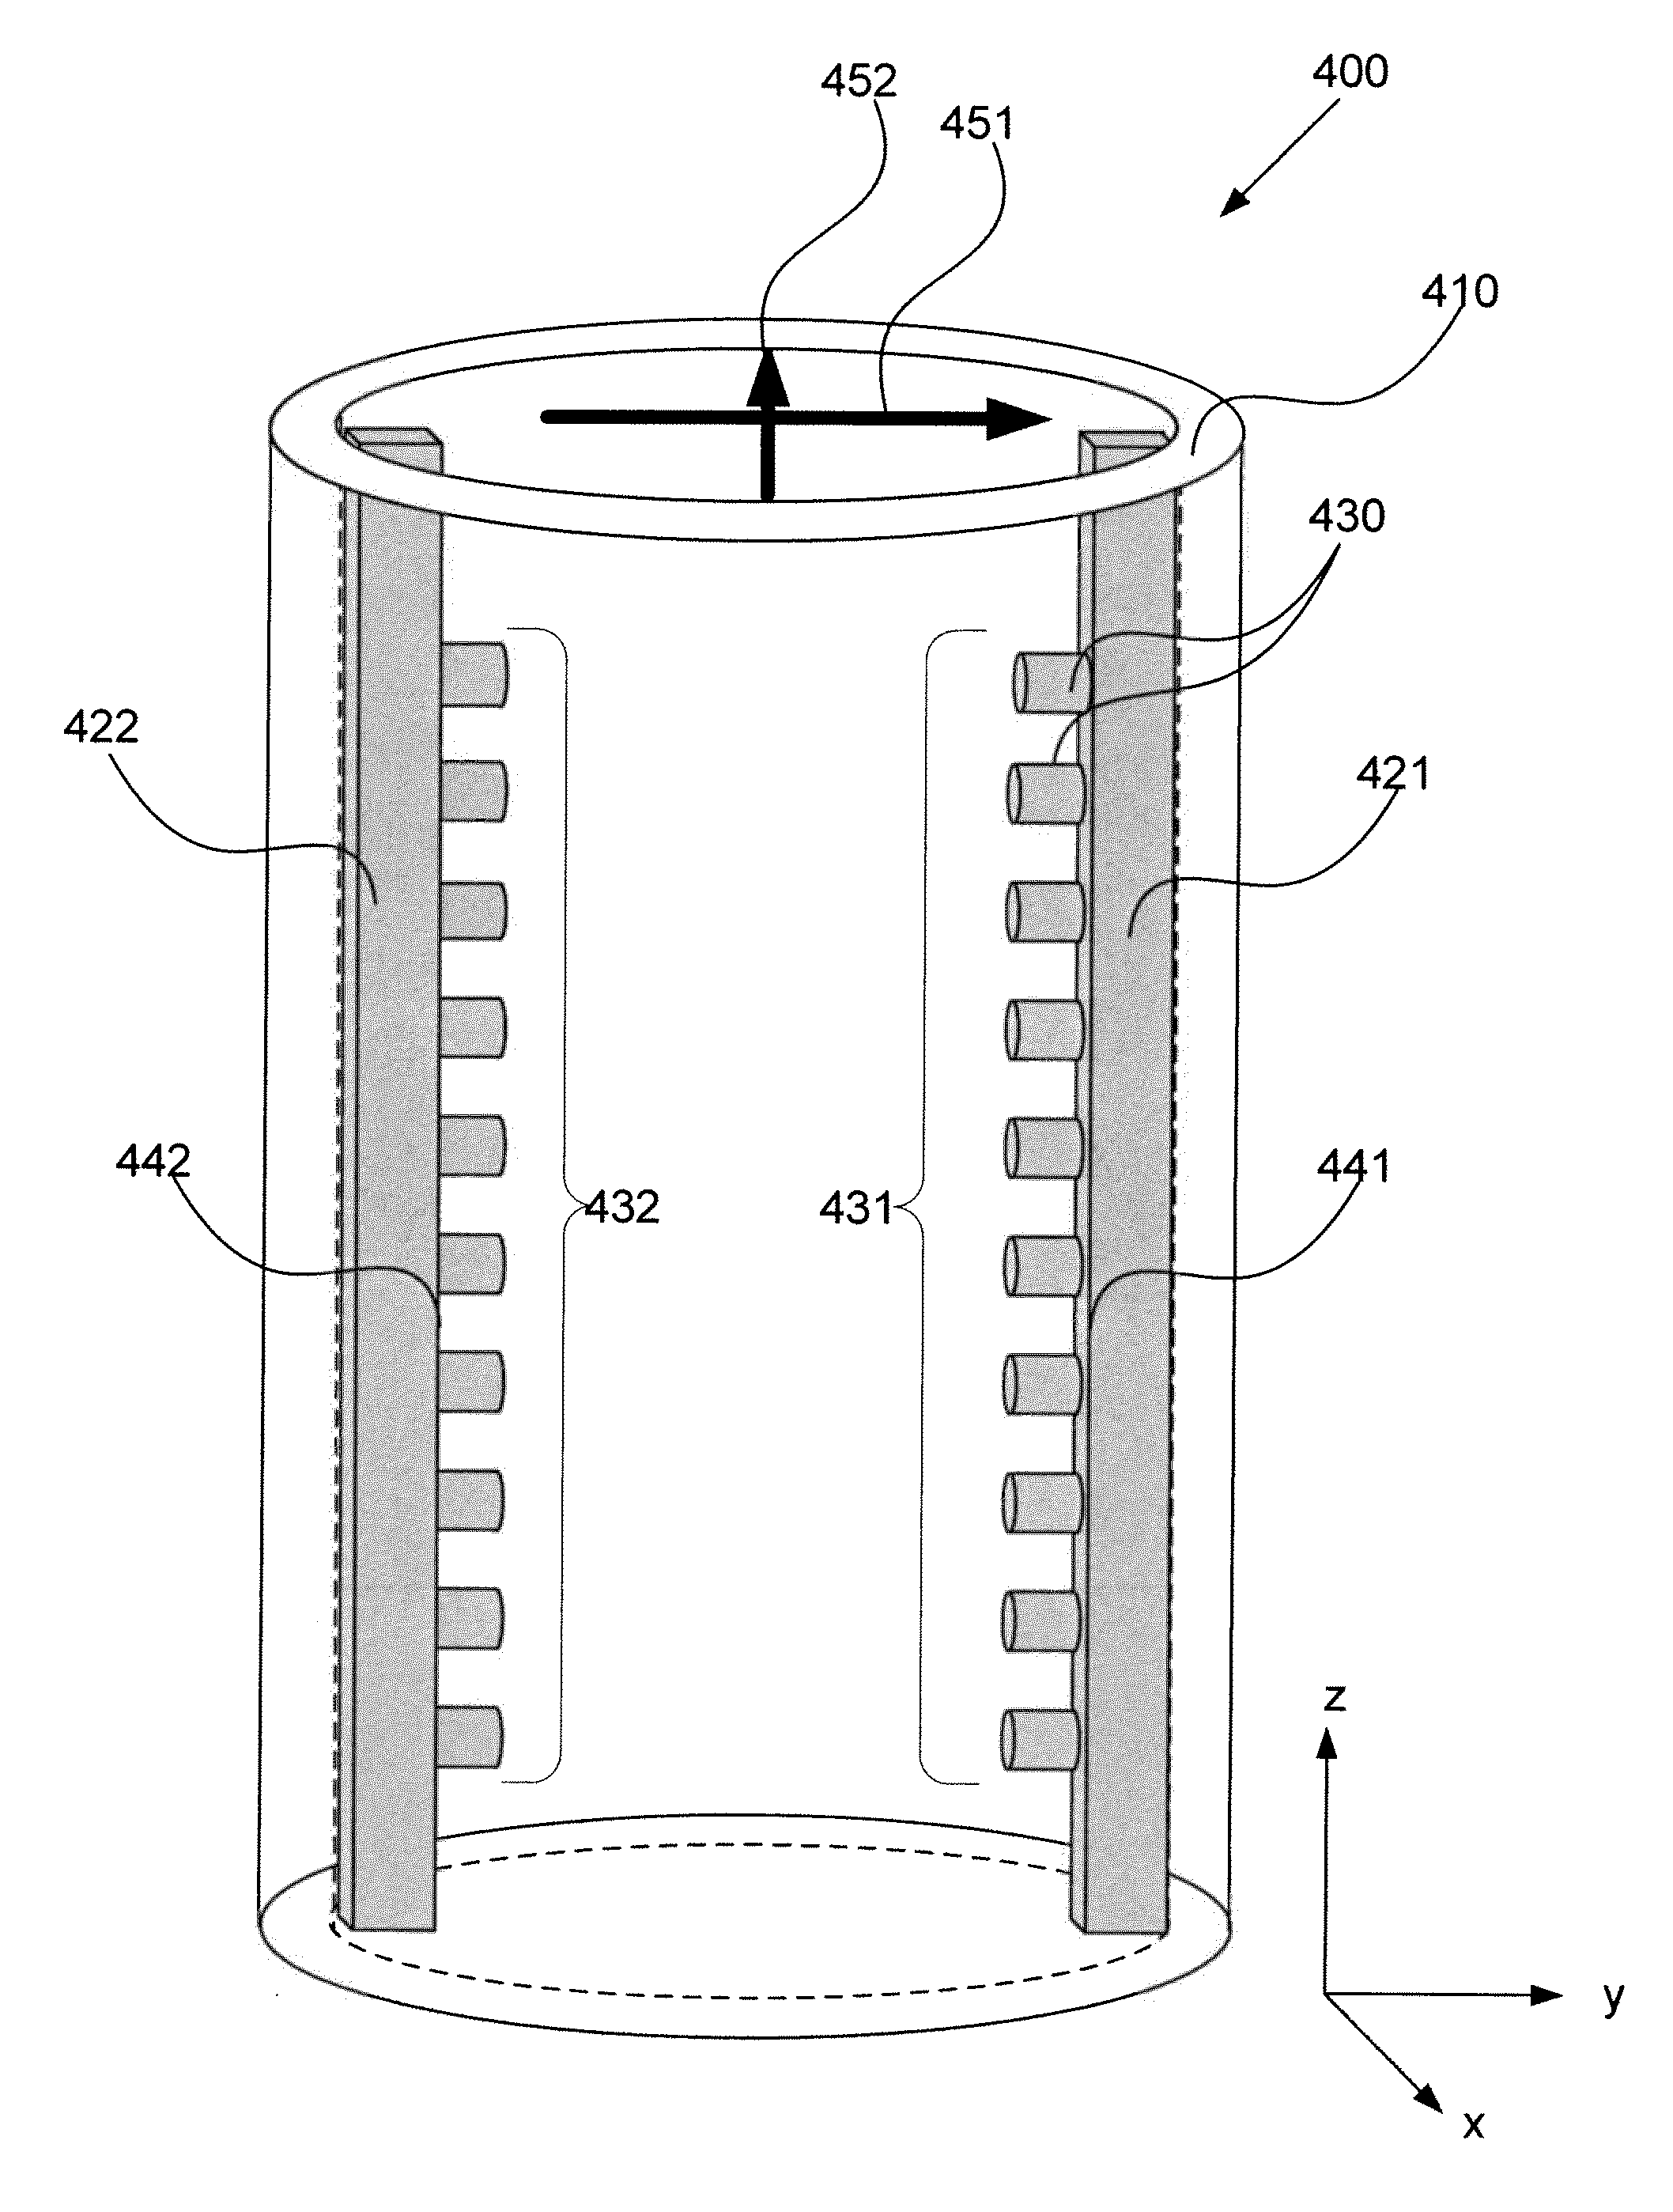 High Power Waveguide Polarizer With Broad Bandwidth and Low Loss, and Methods of Making and Using Same